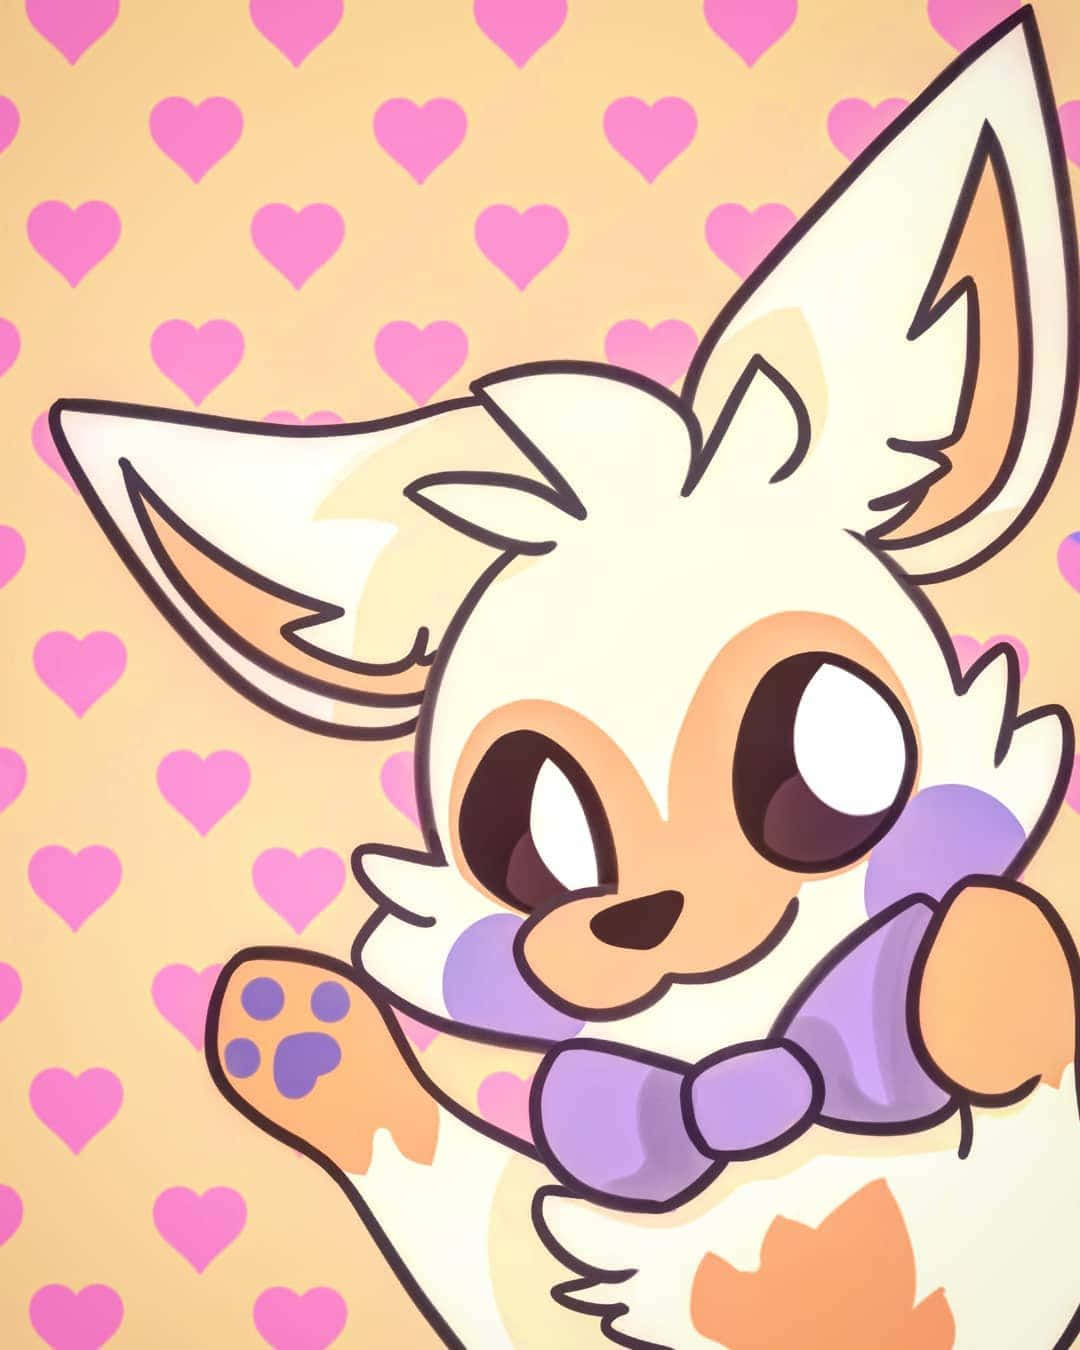 A Cute Fox With A Bow In Front Of Hearts Background